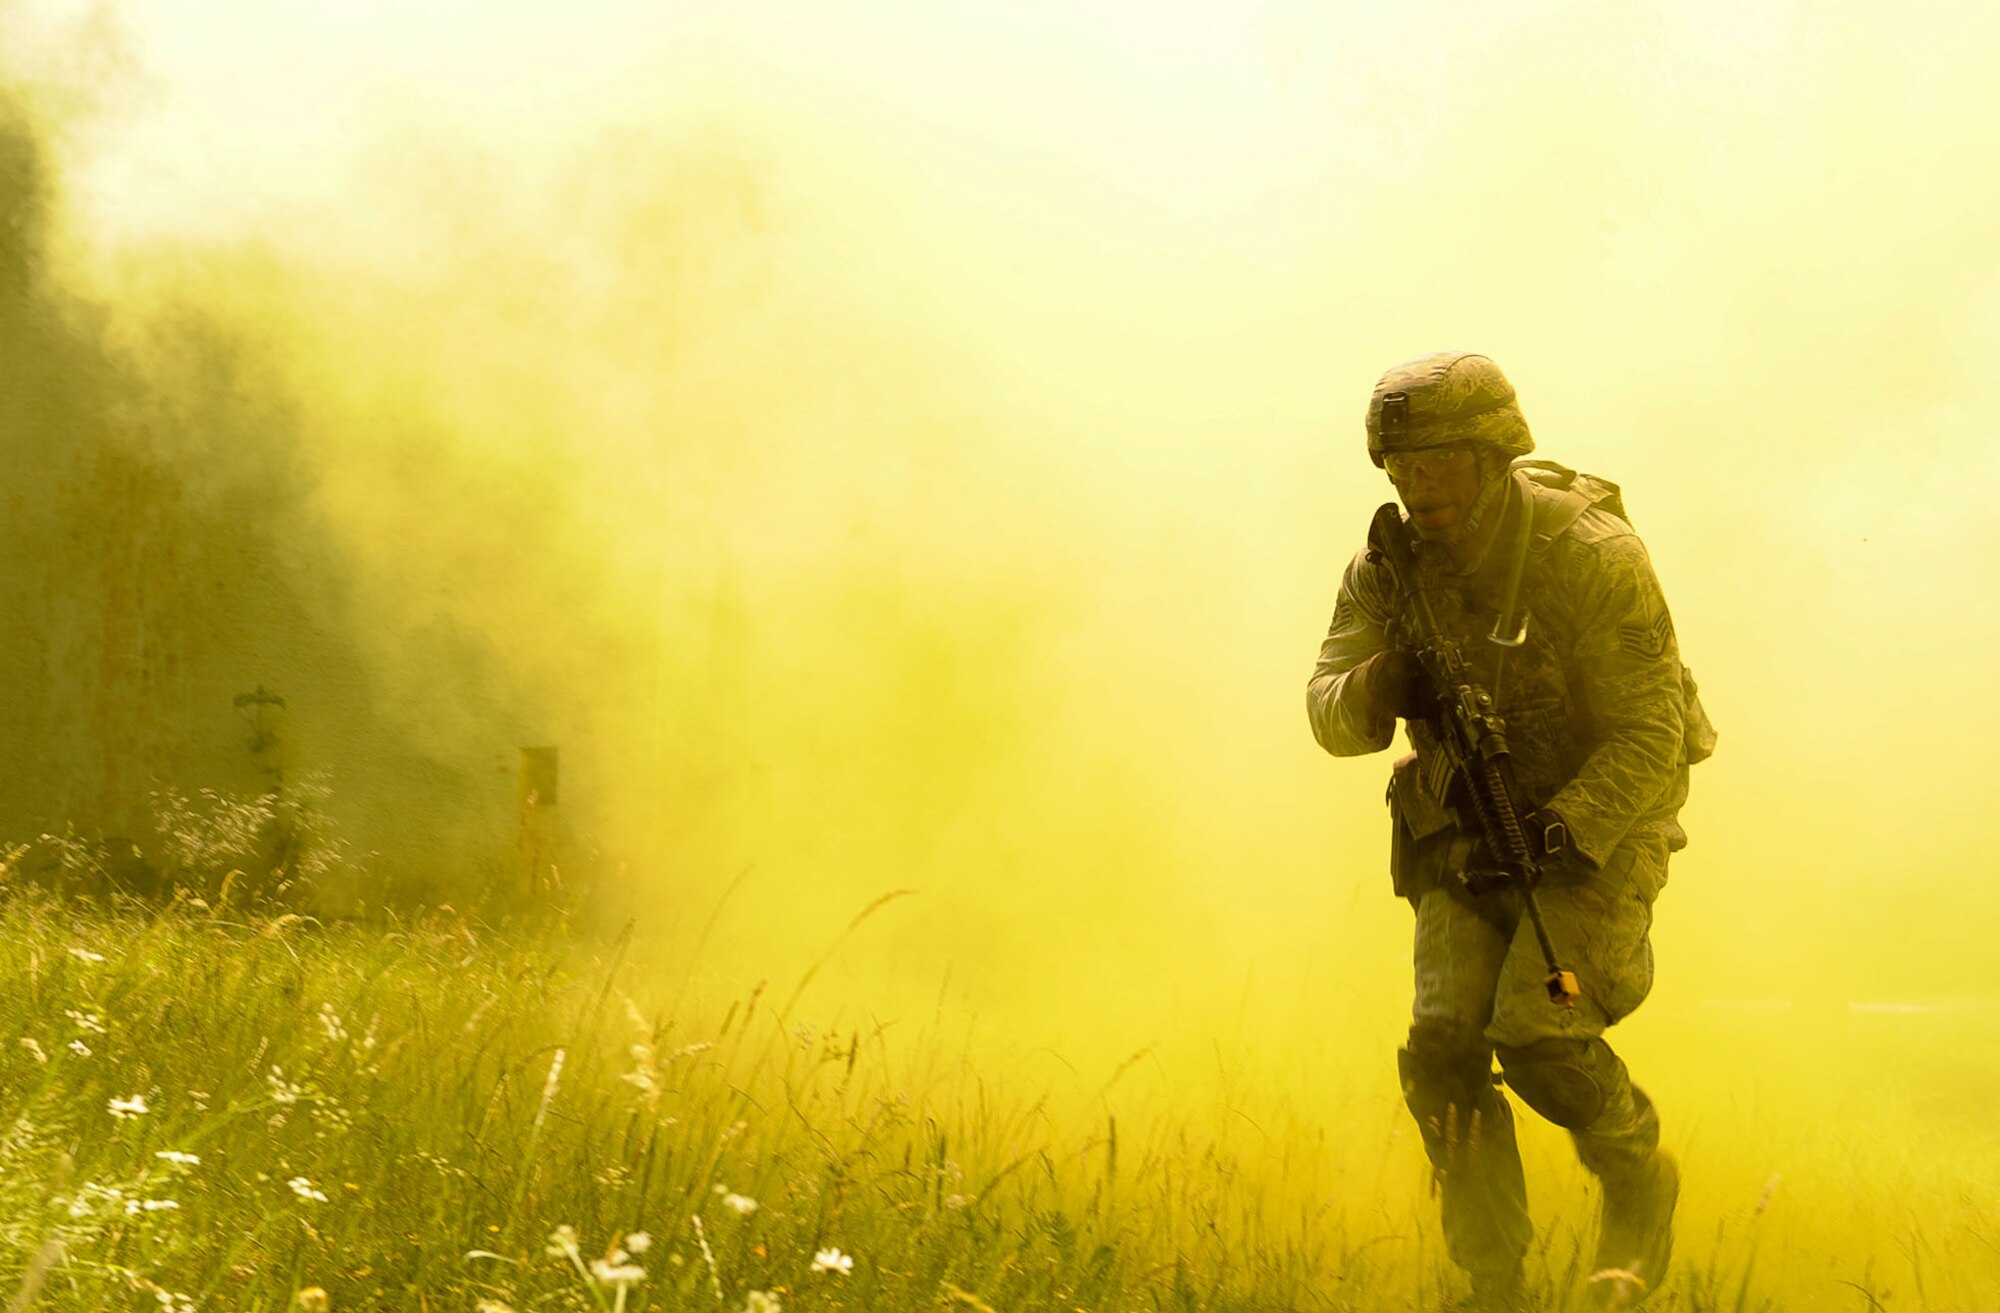 Staff Sgt. Eric Jeffcoat, 100th Security Forces Squadron base defense operation center controller, emerges from smoke grenade smoke during 435th SFS’s Ground Combat Readiness Training Center Security Operations Course at U.S. Army Garrison Baumholder, Germany, June 15, 2017. Conducting missions as a team and being evaluated by the 435th SFS instructor cadre, students showcased knowledge of urban operations, close quarters combat, live firing iterations, mounted and dismounted patrols, entry control point operations, and counter improved-explosive device operations while at Baumholder. (U.S. Air Force photo by Airman 1st Class Savannah L. Waters)